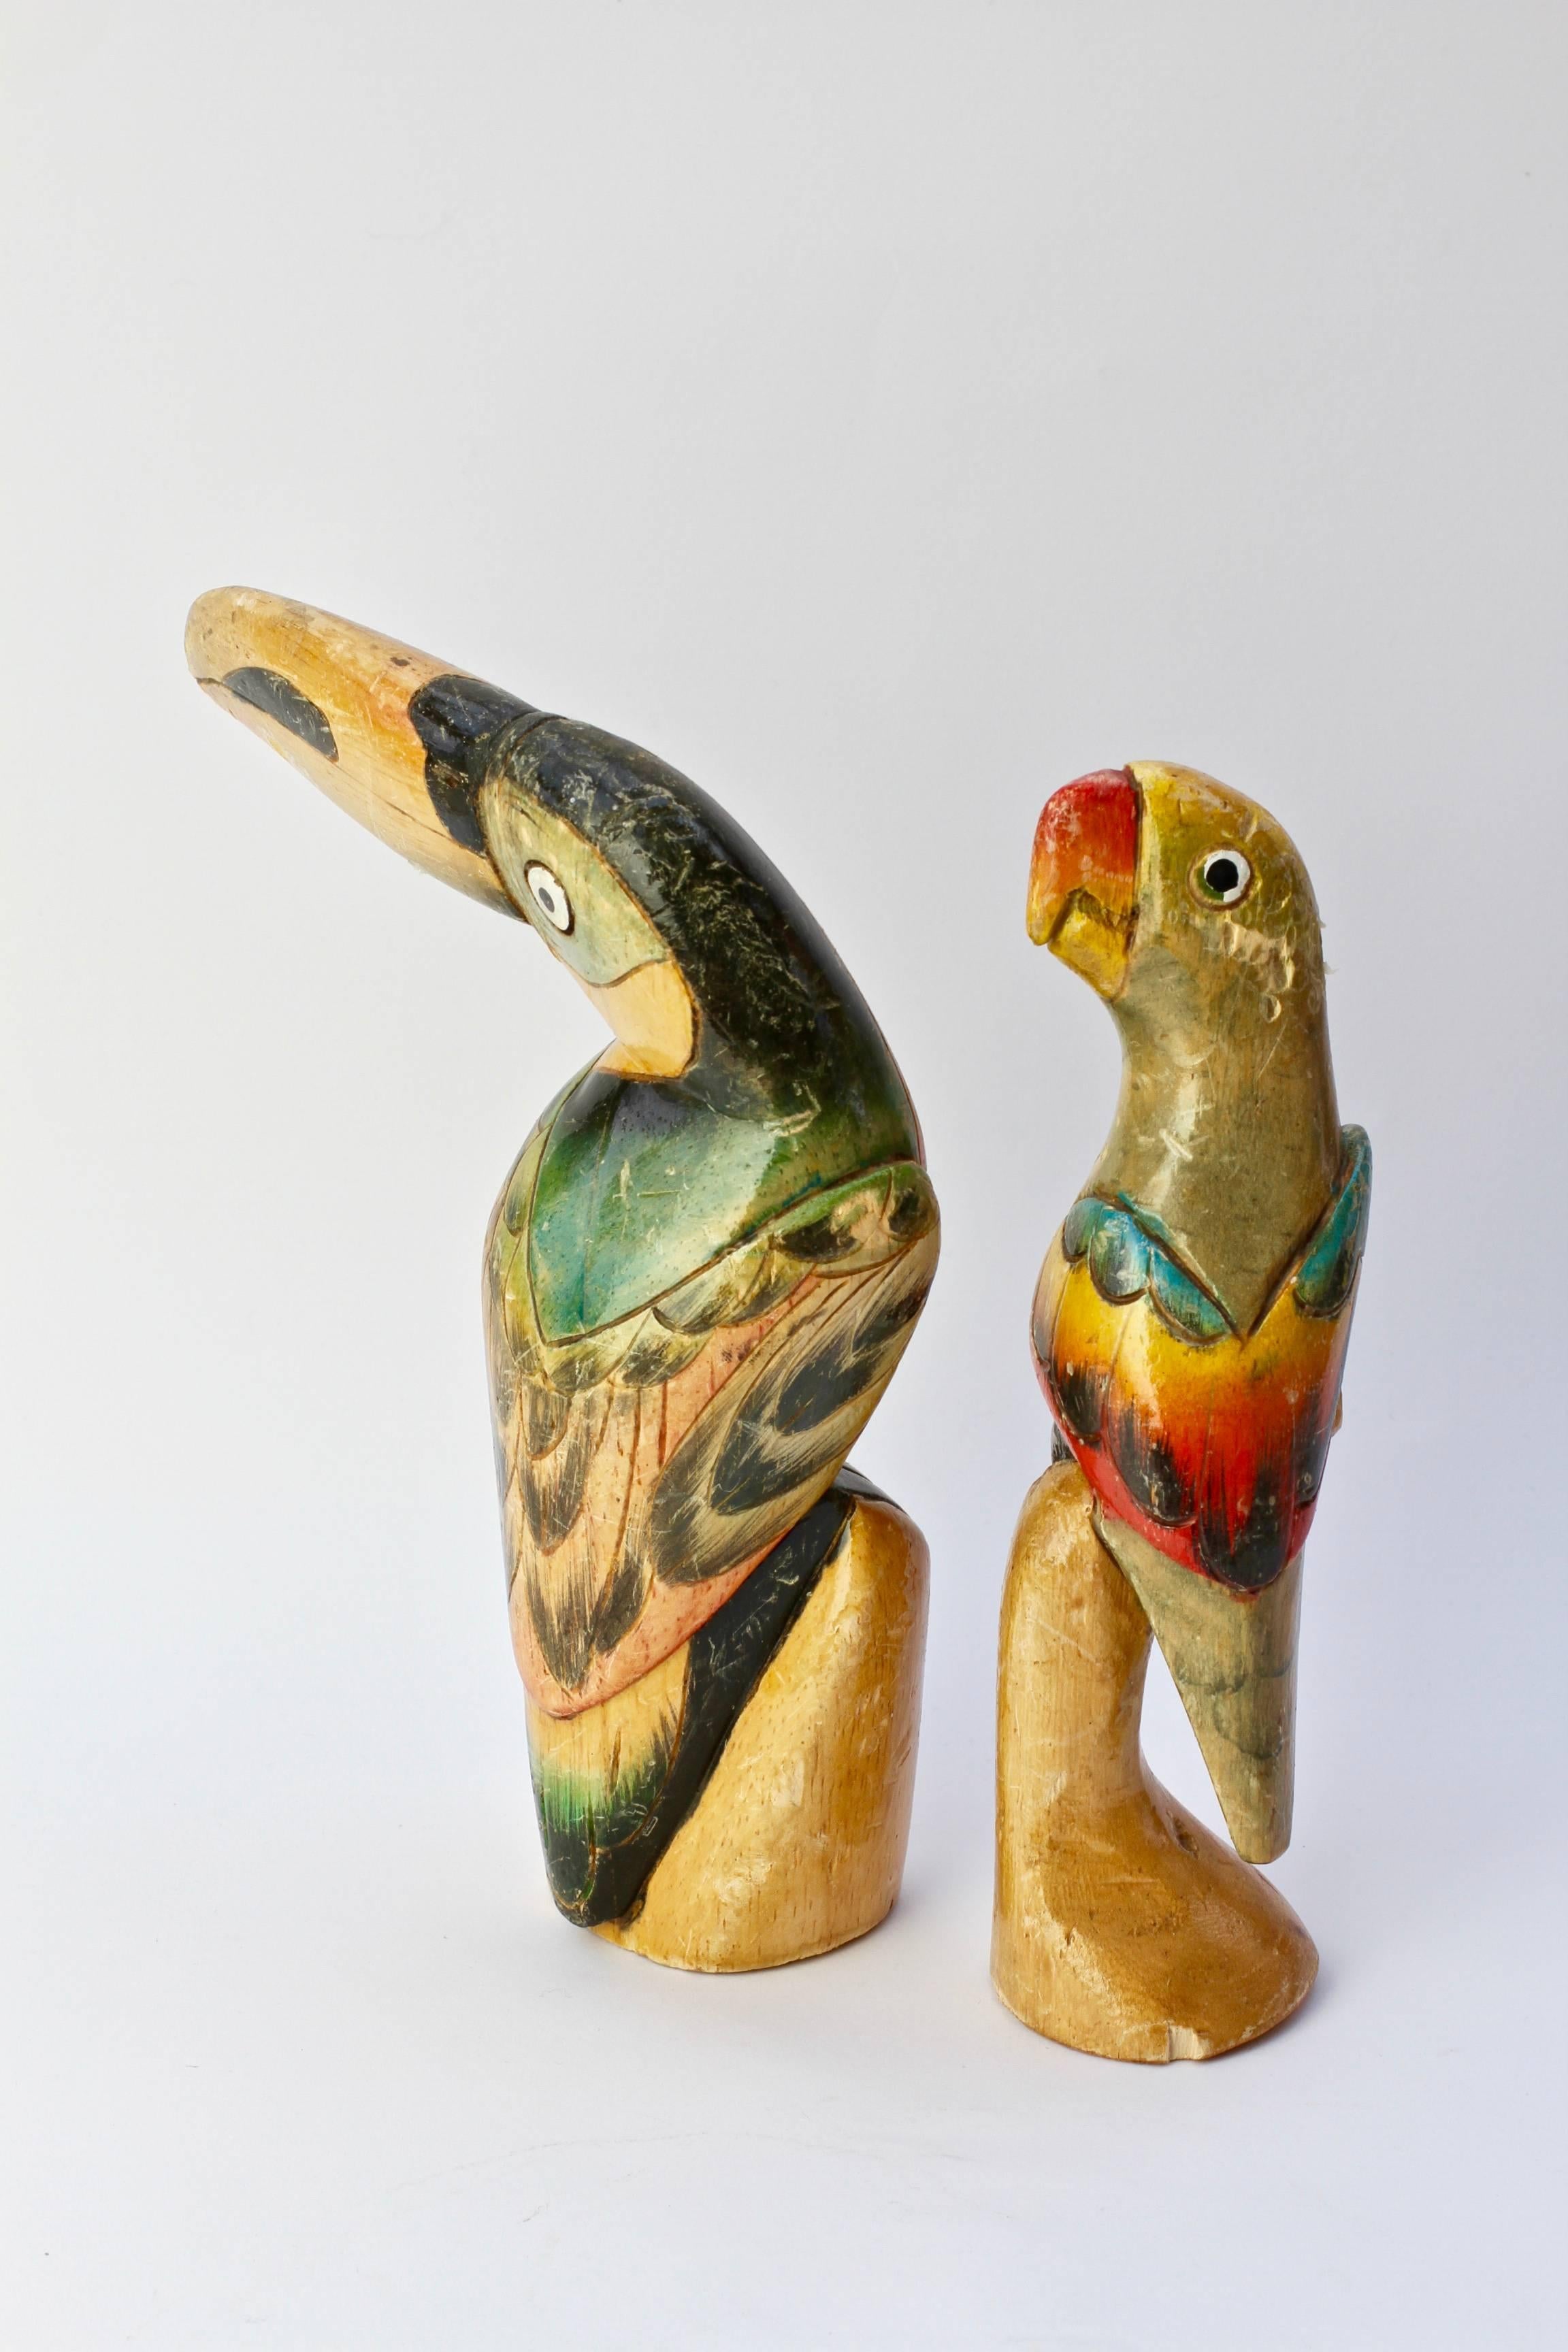 Post war pair of colorful (colorful) hand-carved and painted tropical birds. Dating from the 1940s and made for the tourist market, we expect these birds where made in South America or the West Indies. Showing a lovely patina, these birds would make